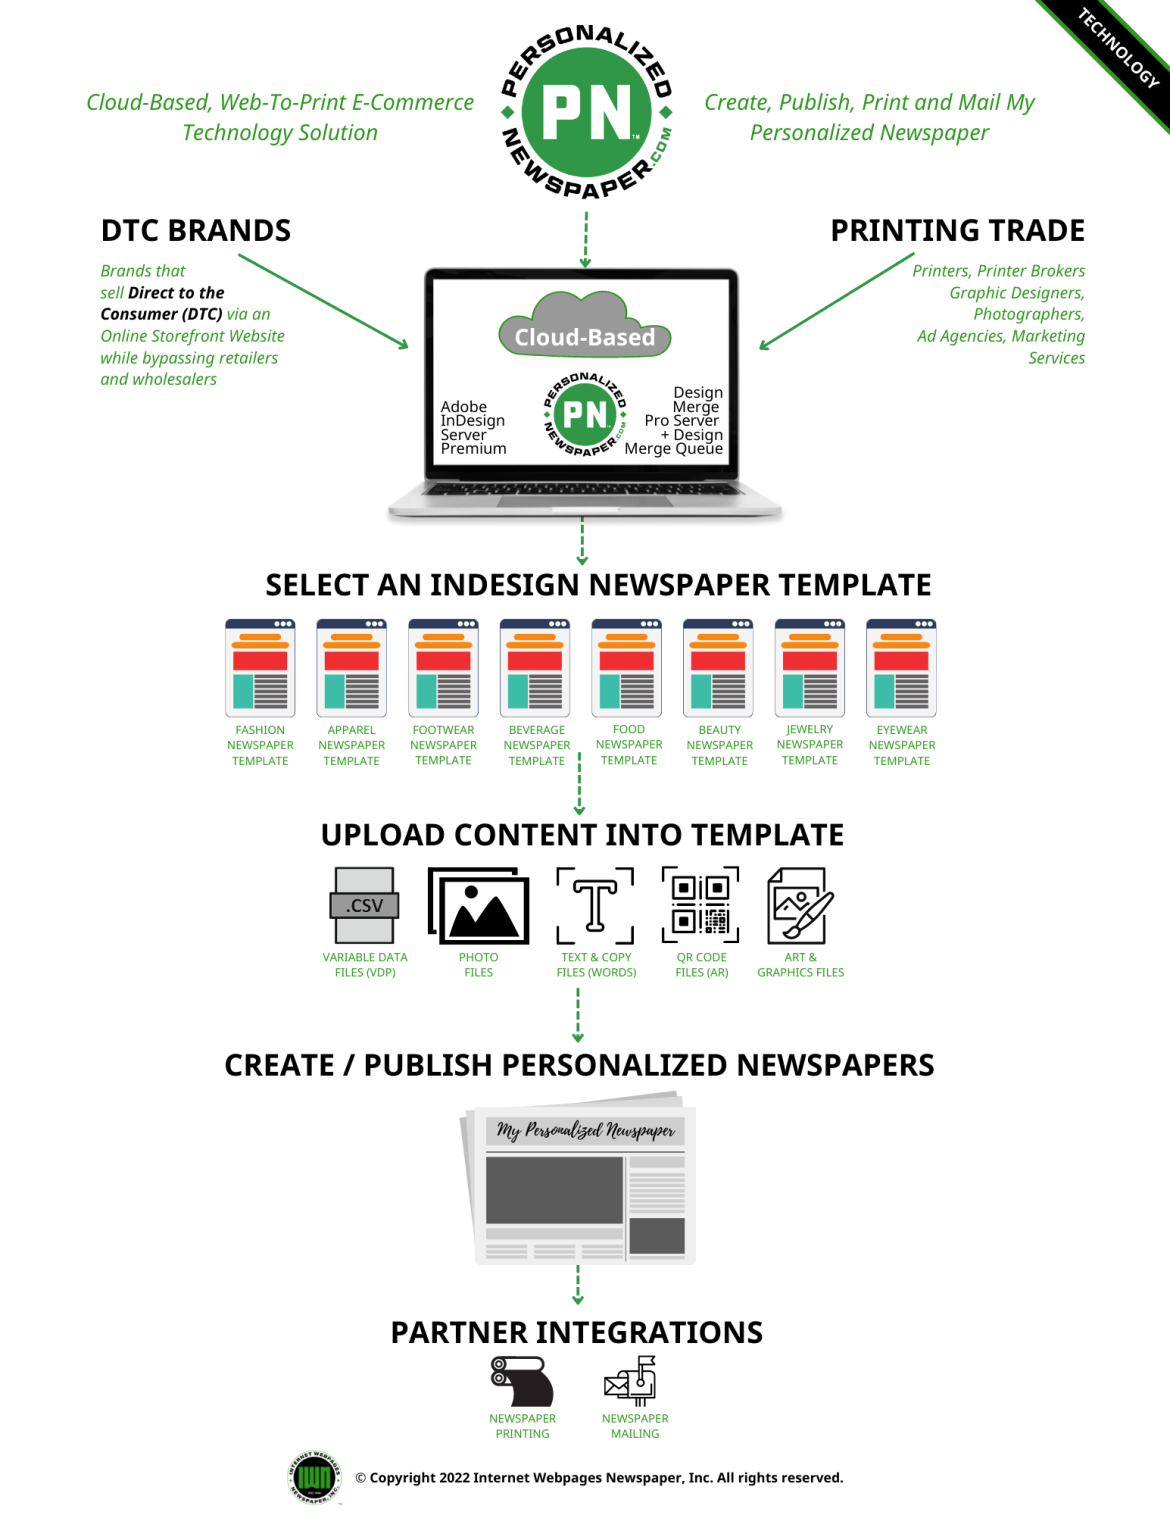 PersonalizedNewspaper.com Technology 1-Pager